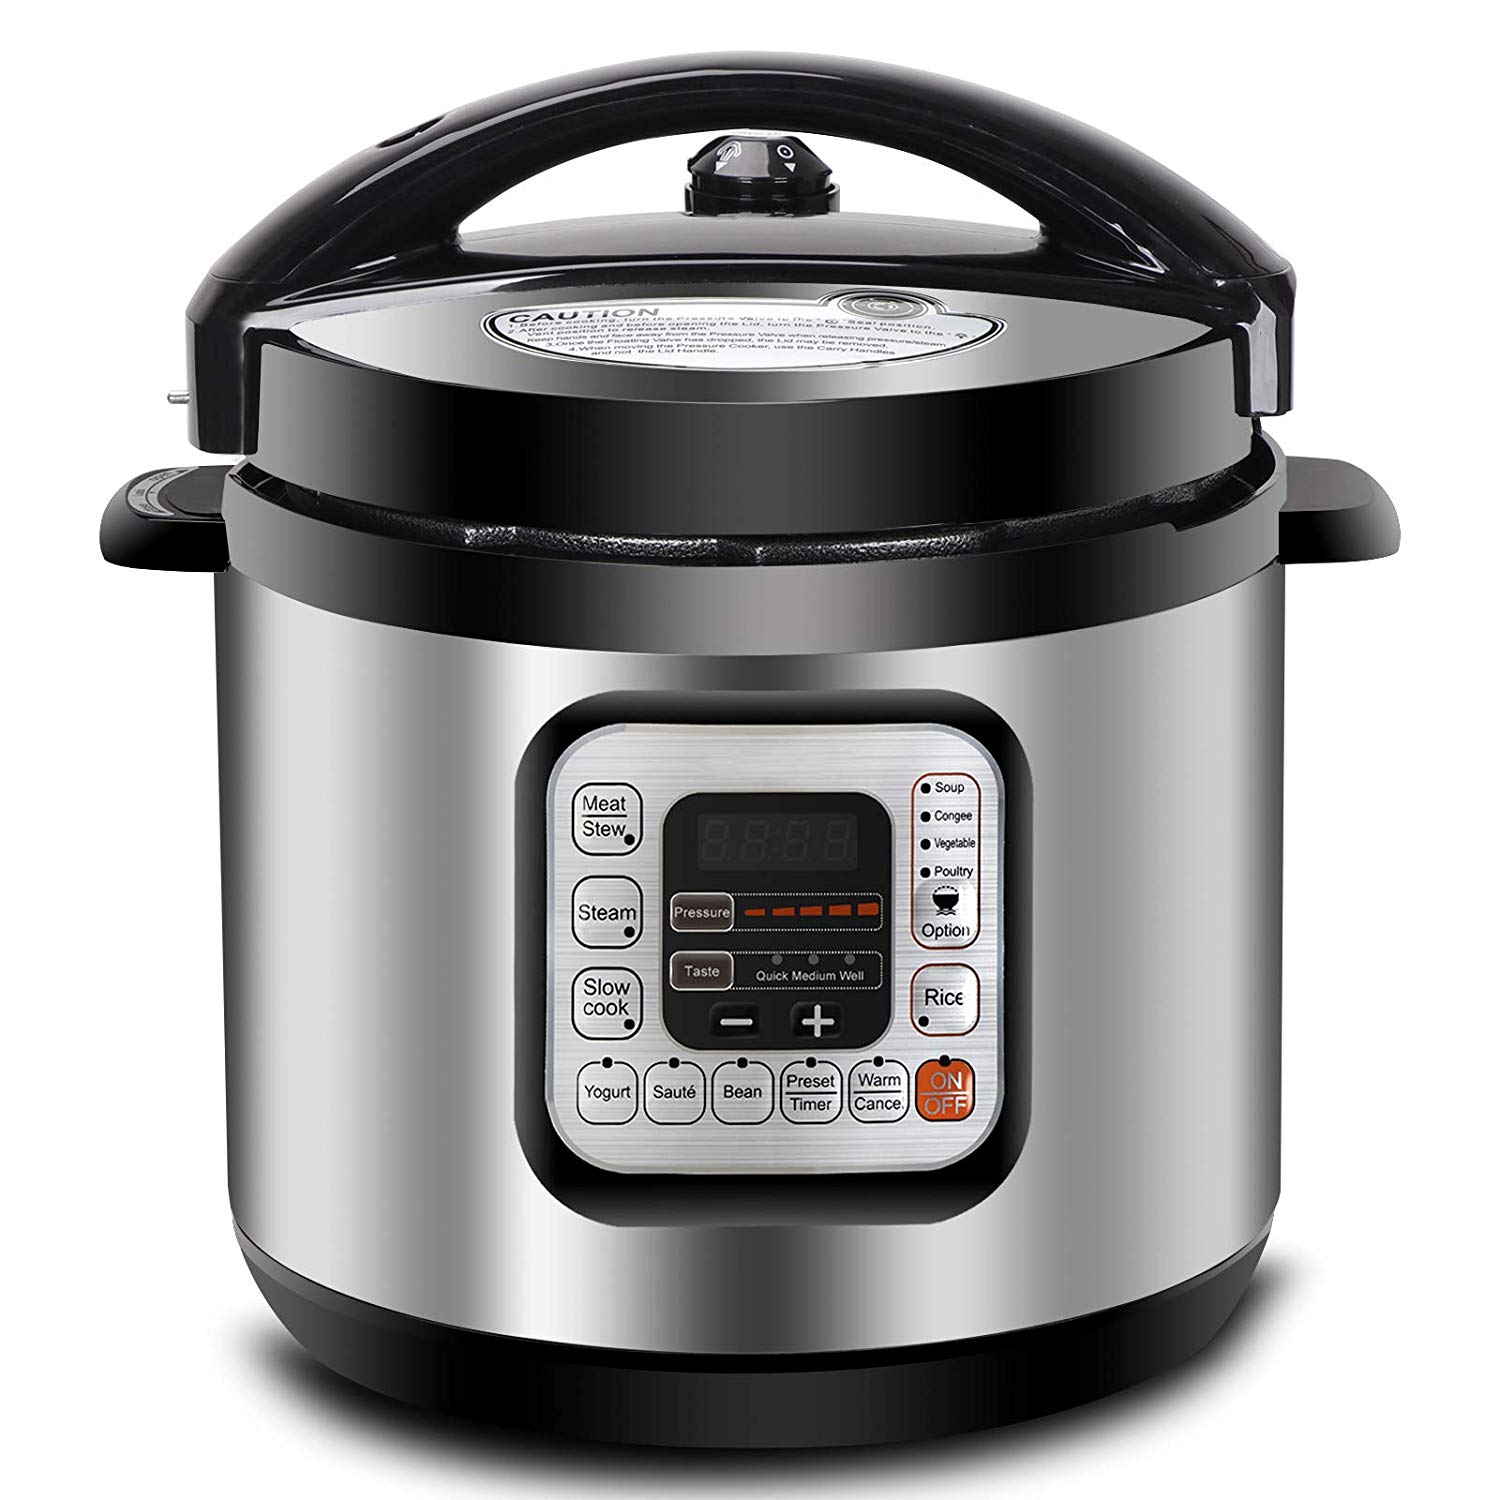 Ninja 4 in 1 Cooking System Slow Cooker Stainless steel MC900QSS